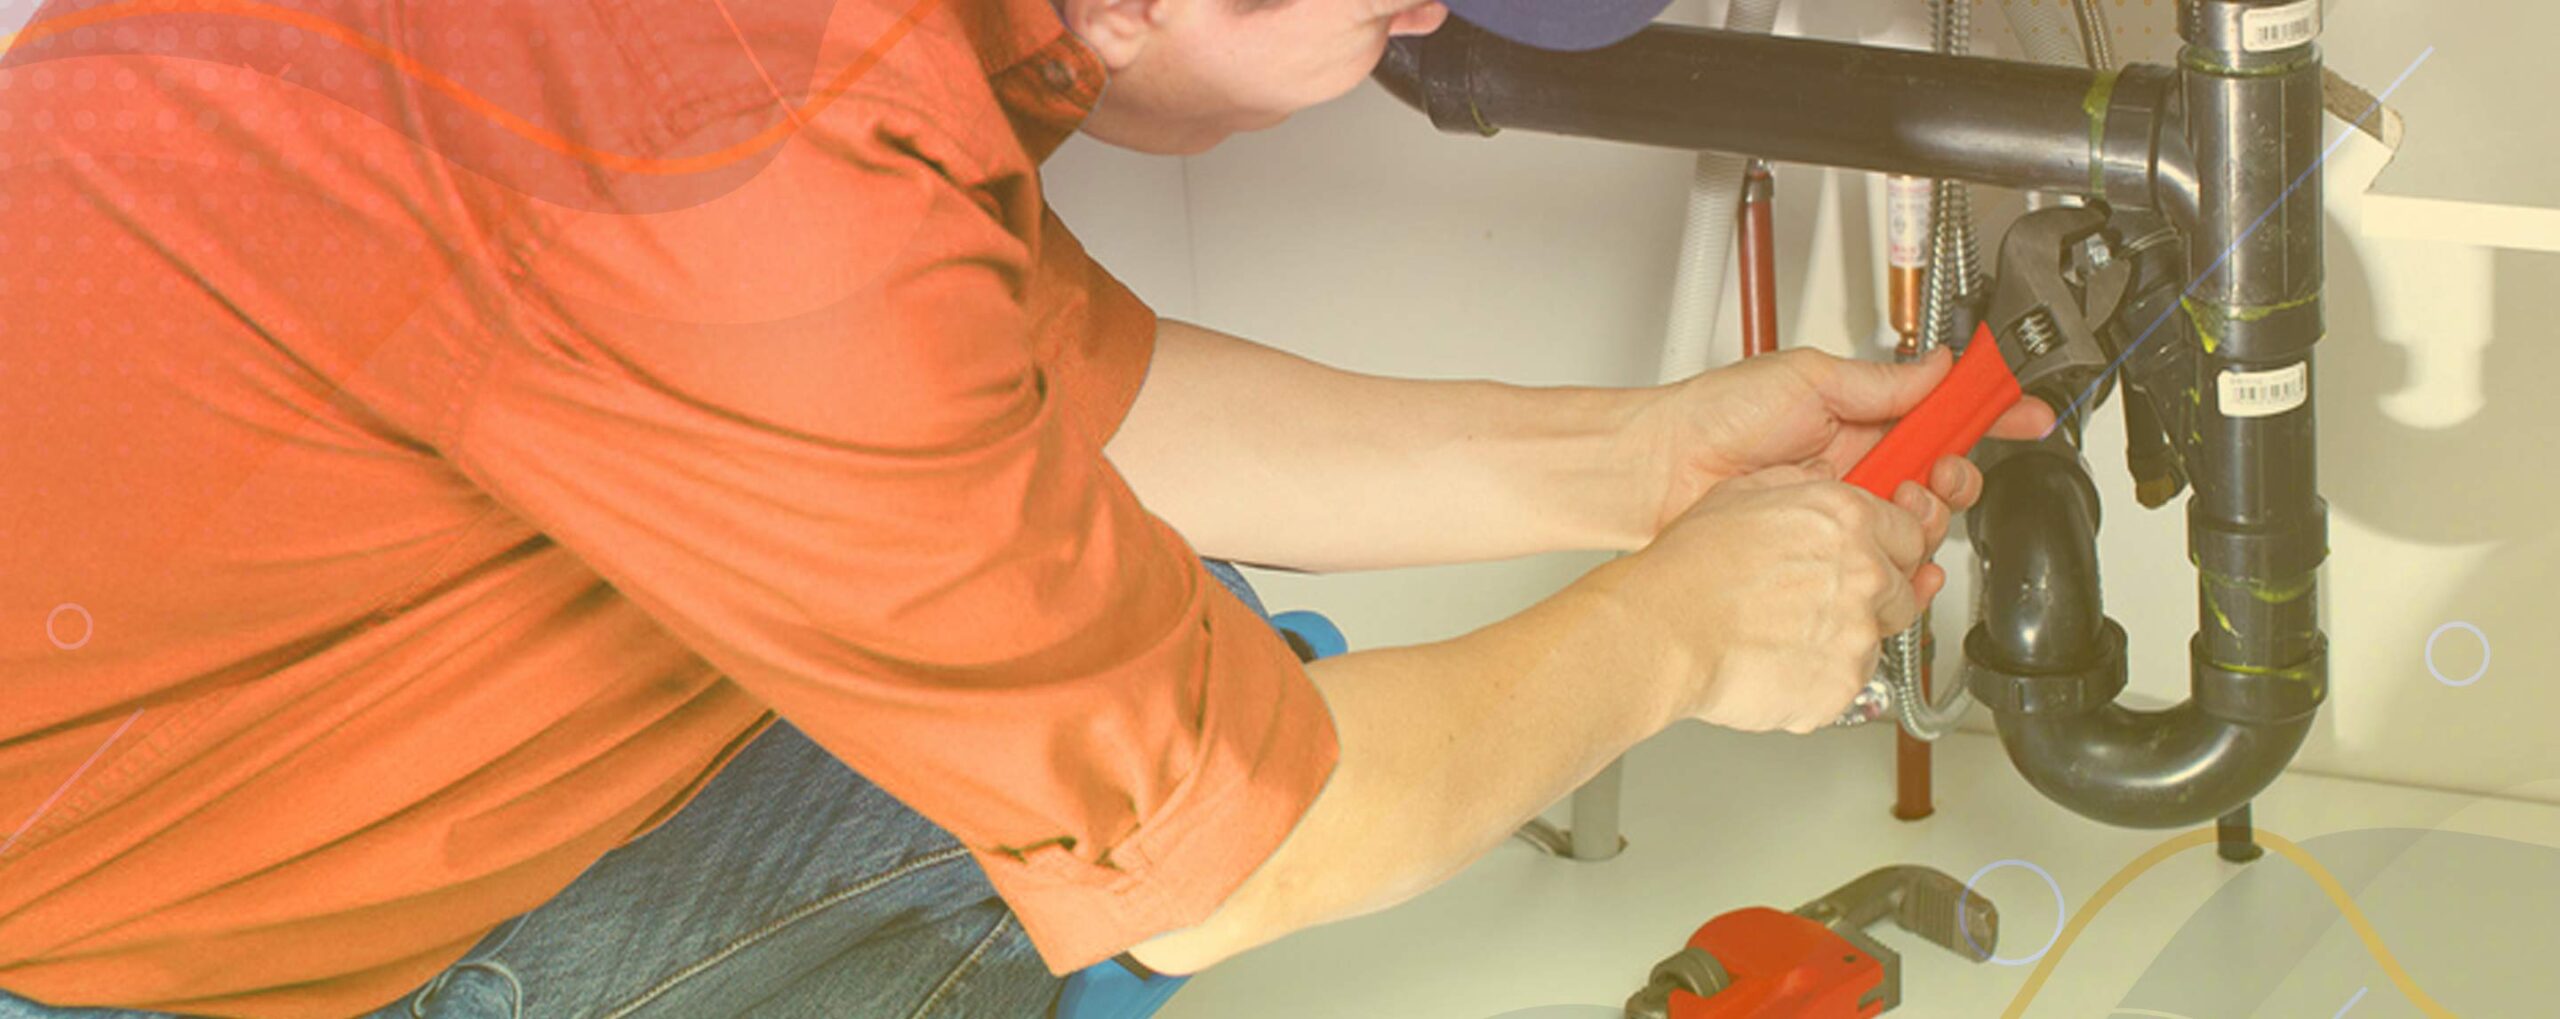 8 Most Common Plumbing Problems